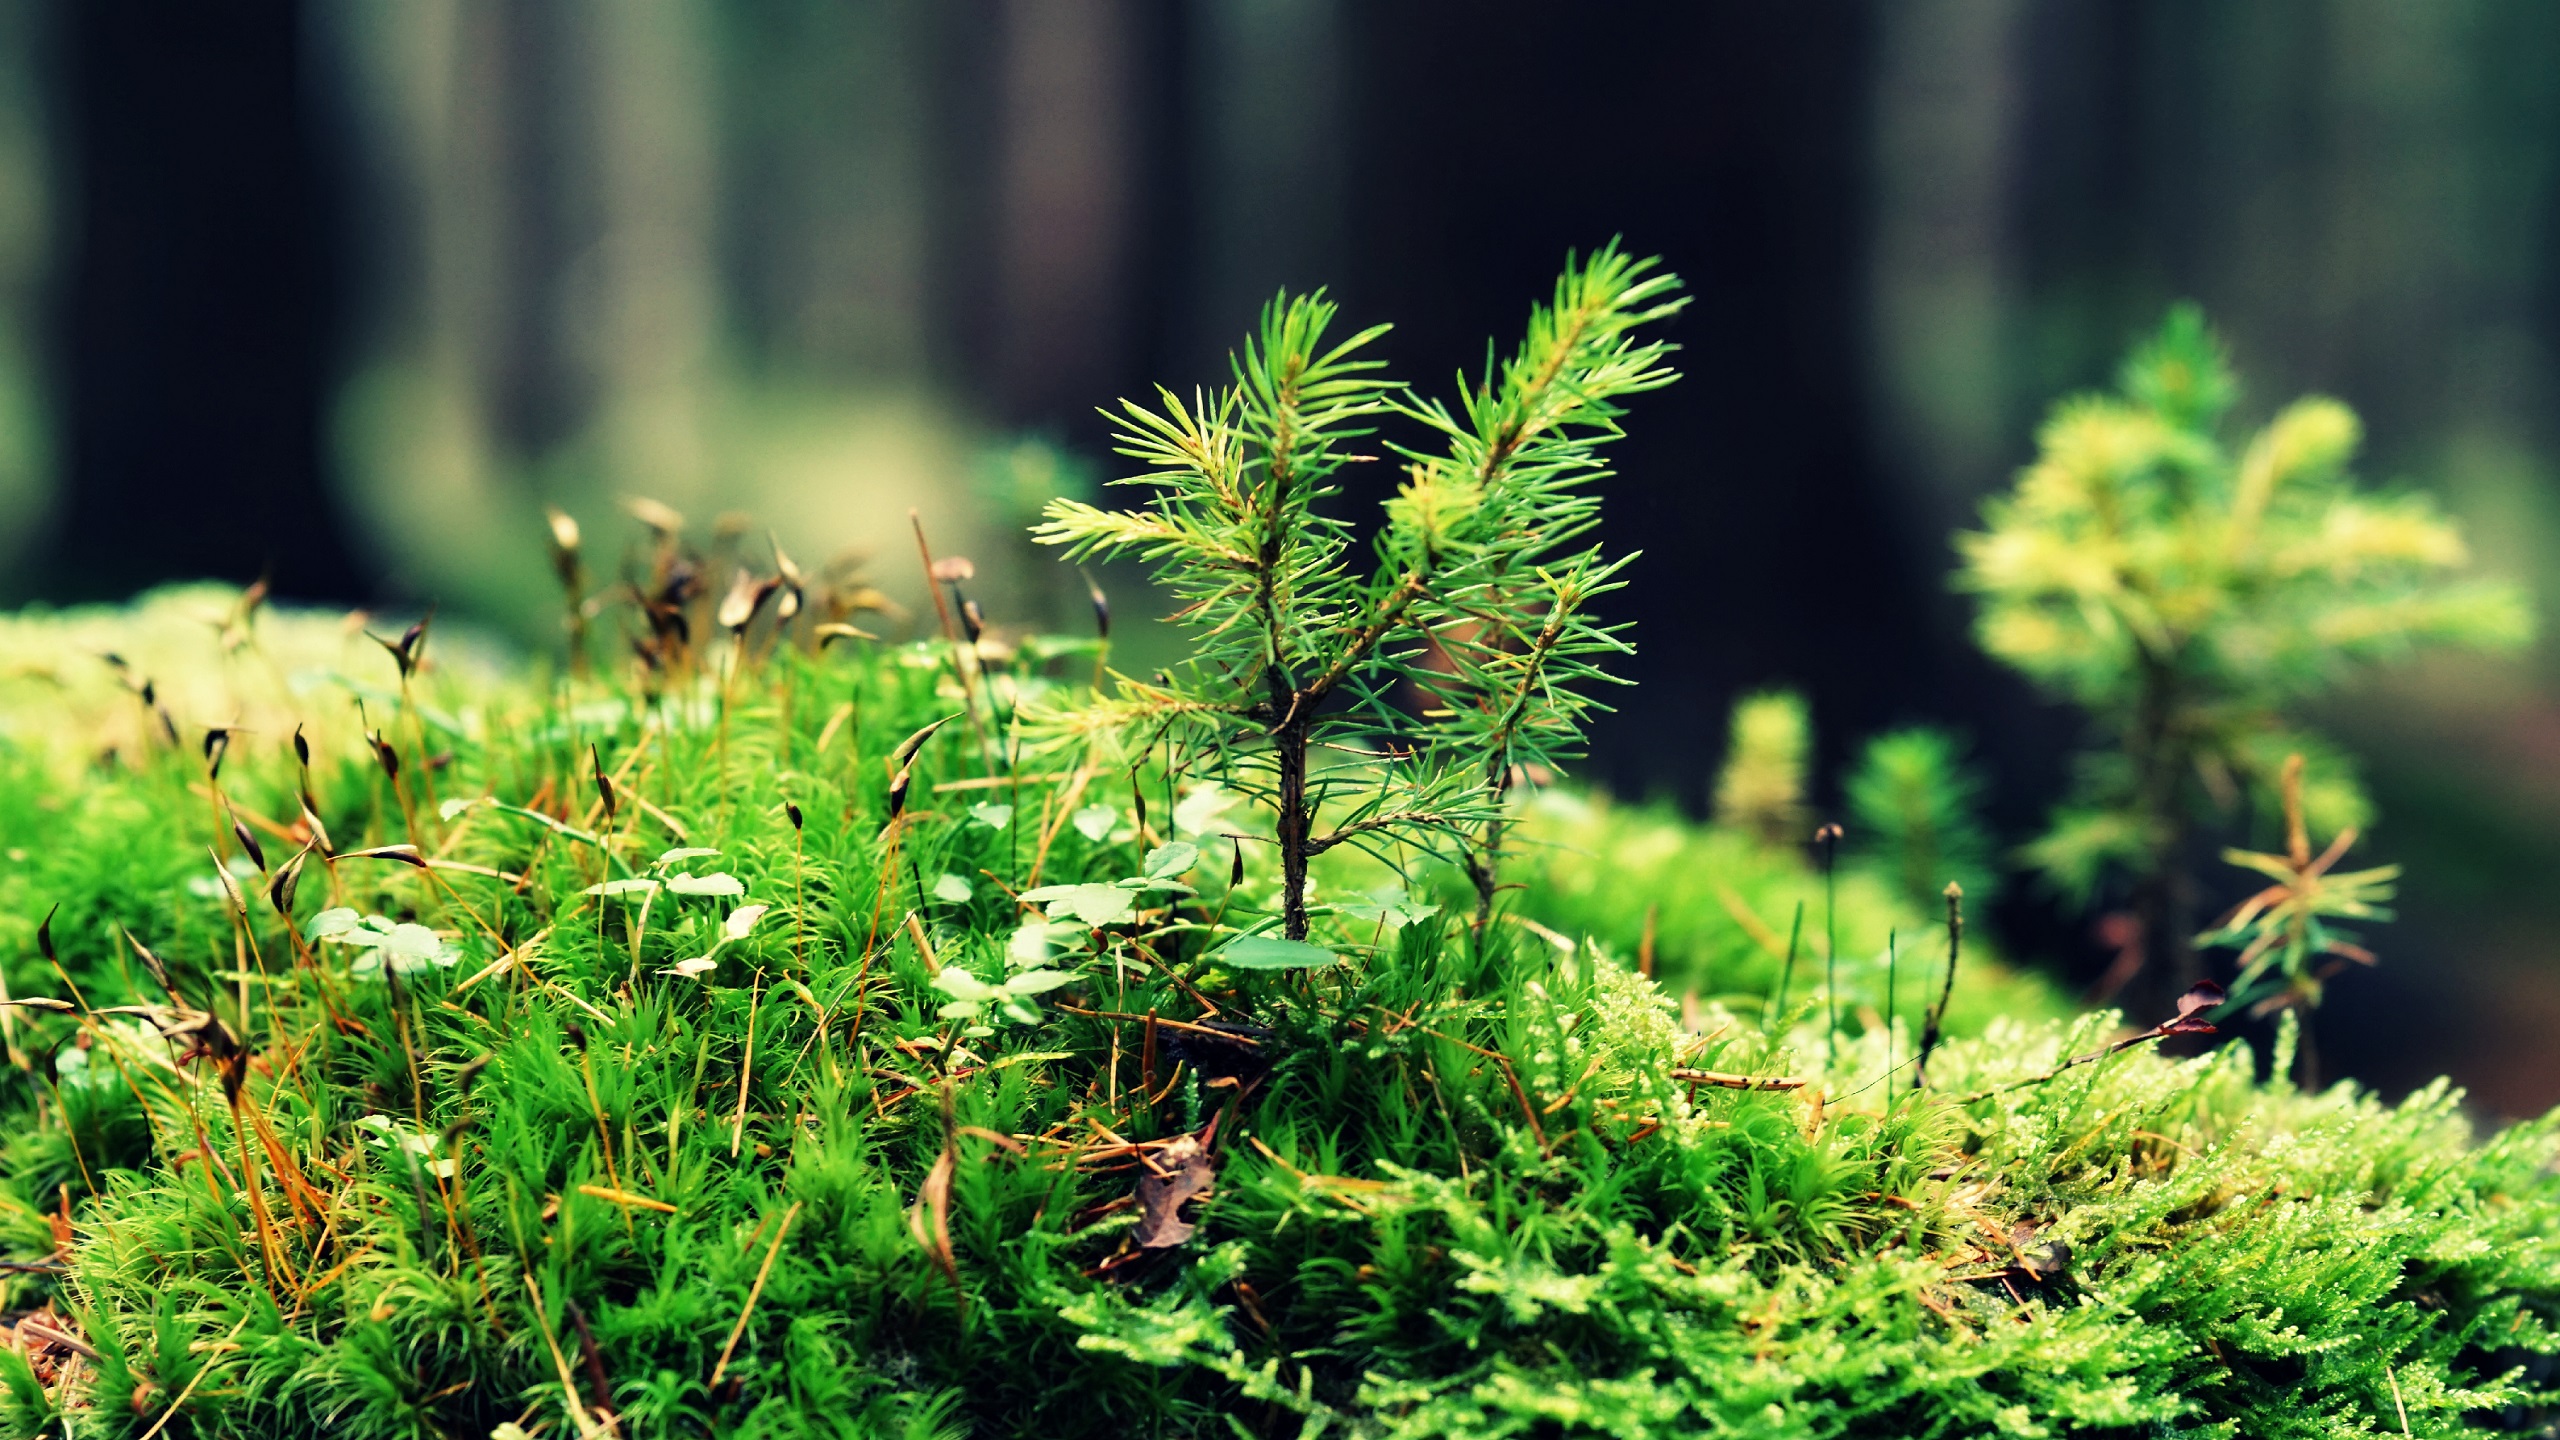 General 2560x1440 photography wood nature plants leaves forest